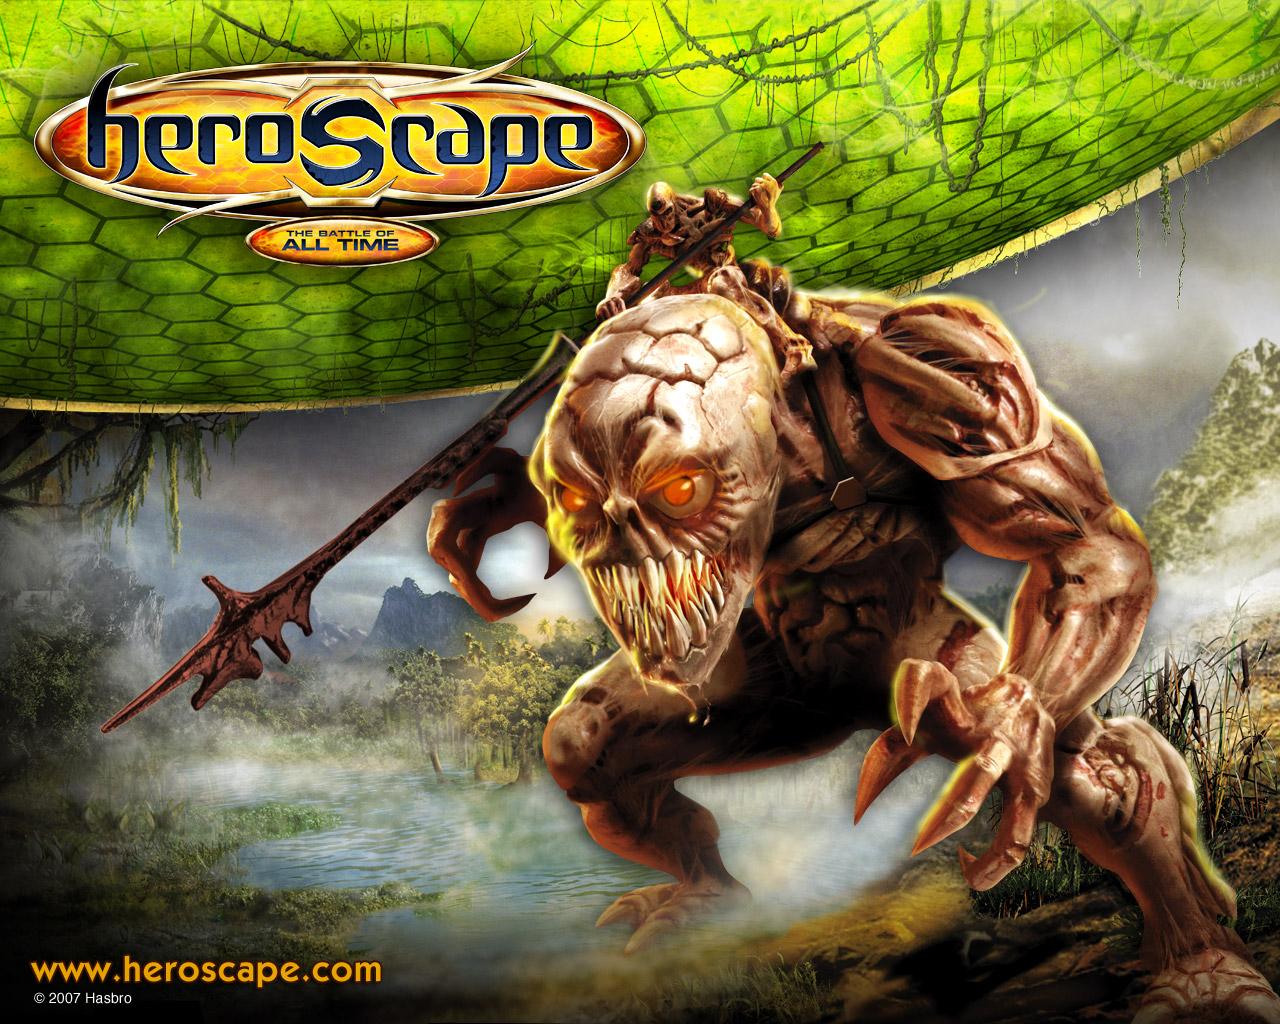 Heroscape Wallpaper From The Hasbro Site